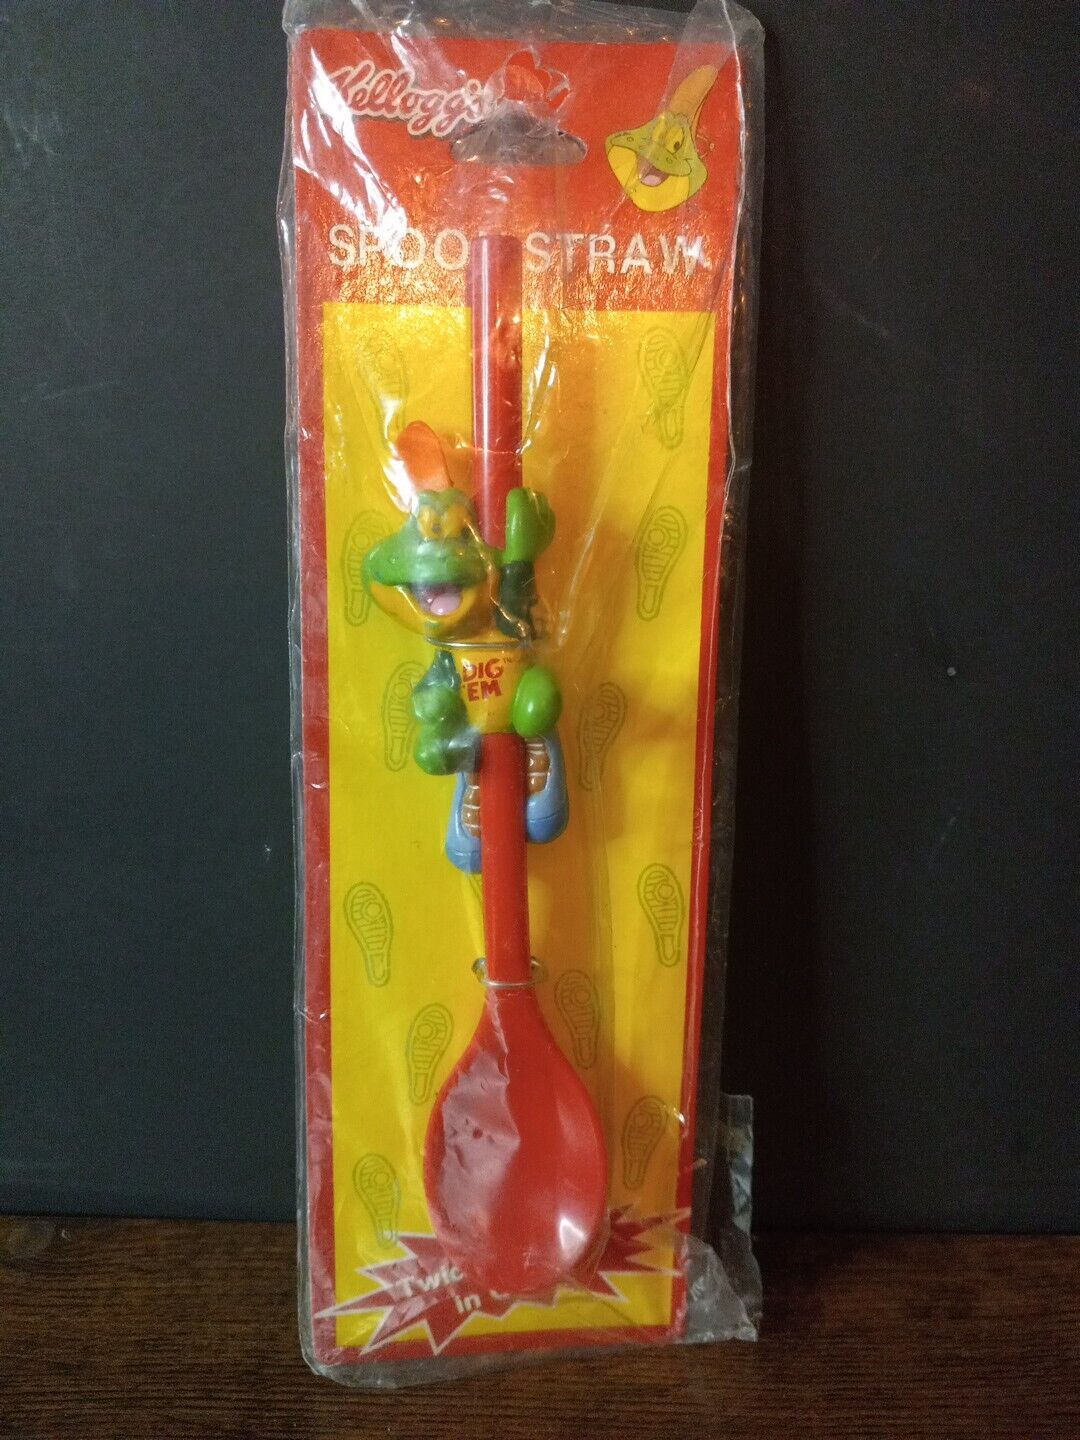 Vintage 2000 Dig Em Frog Spoon Straw Kelloggs Factory Sealed New Cereal box toy